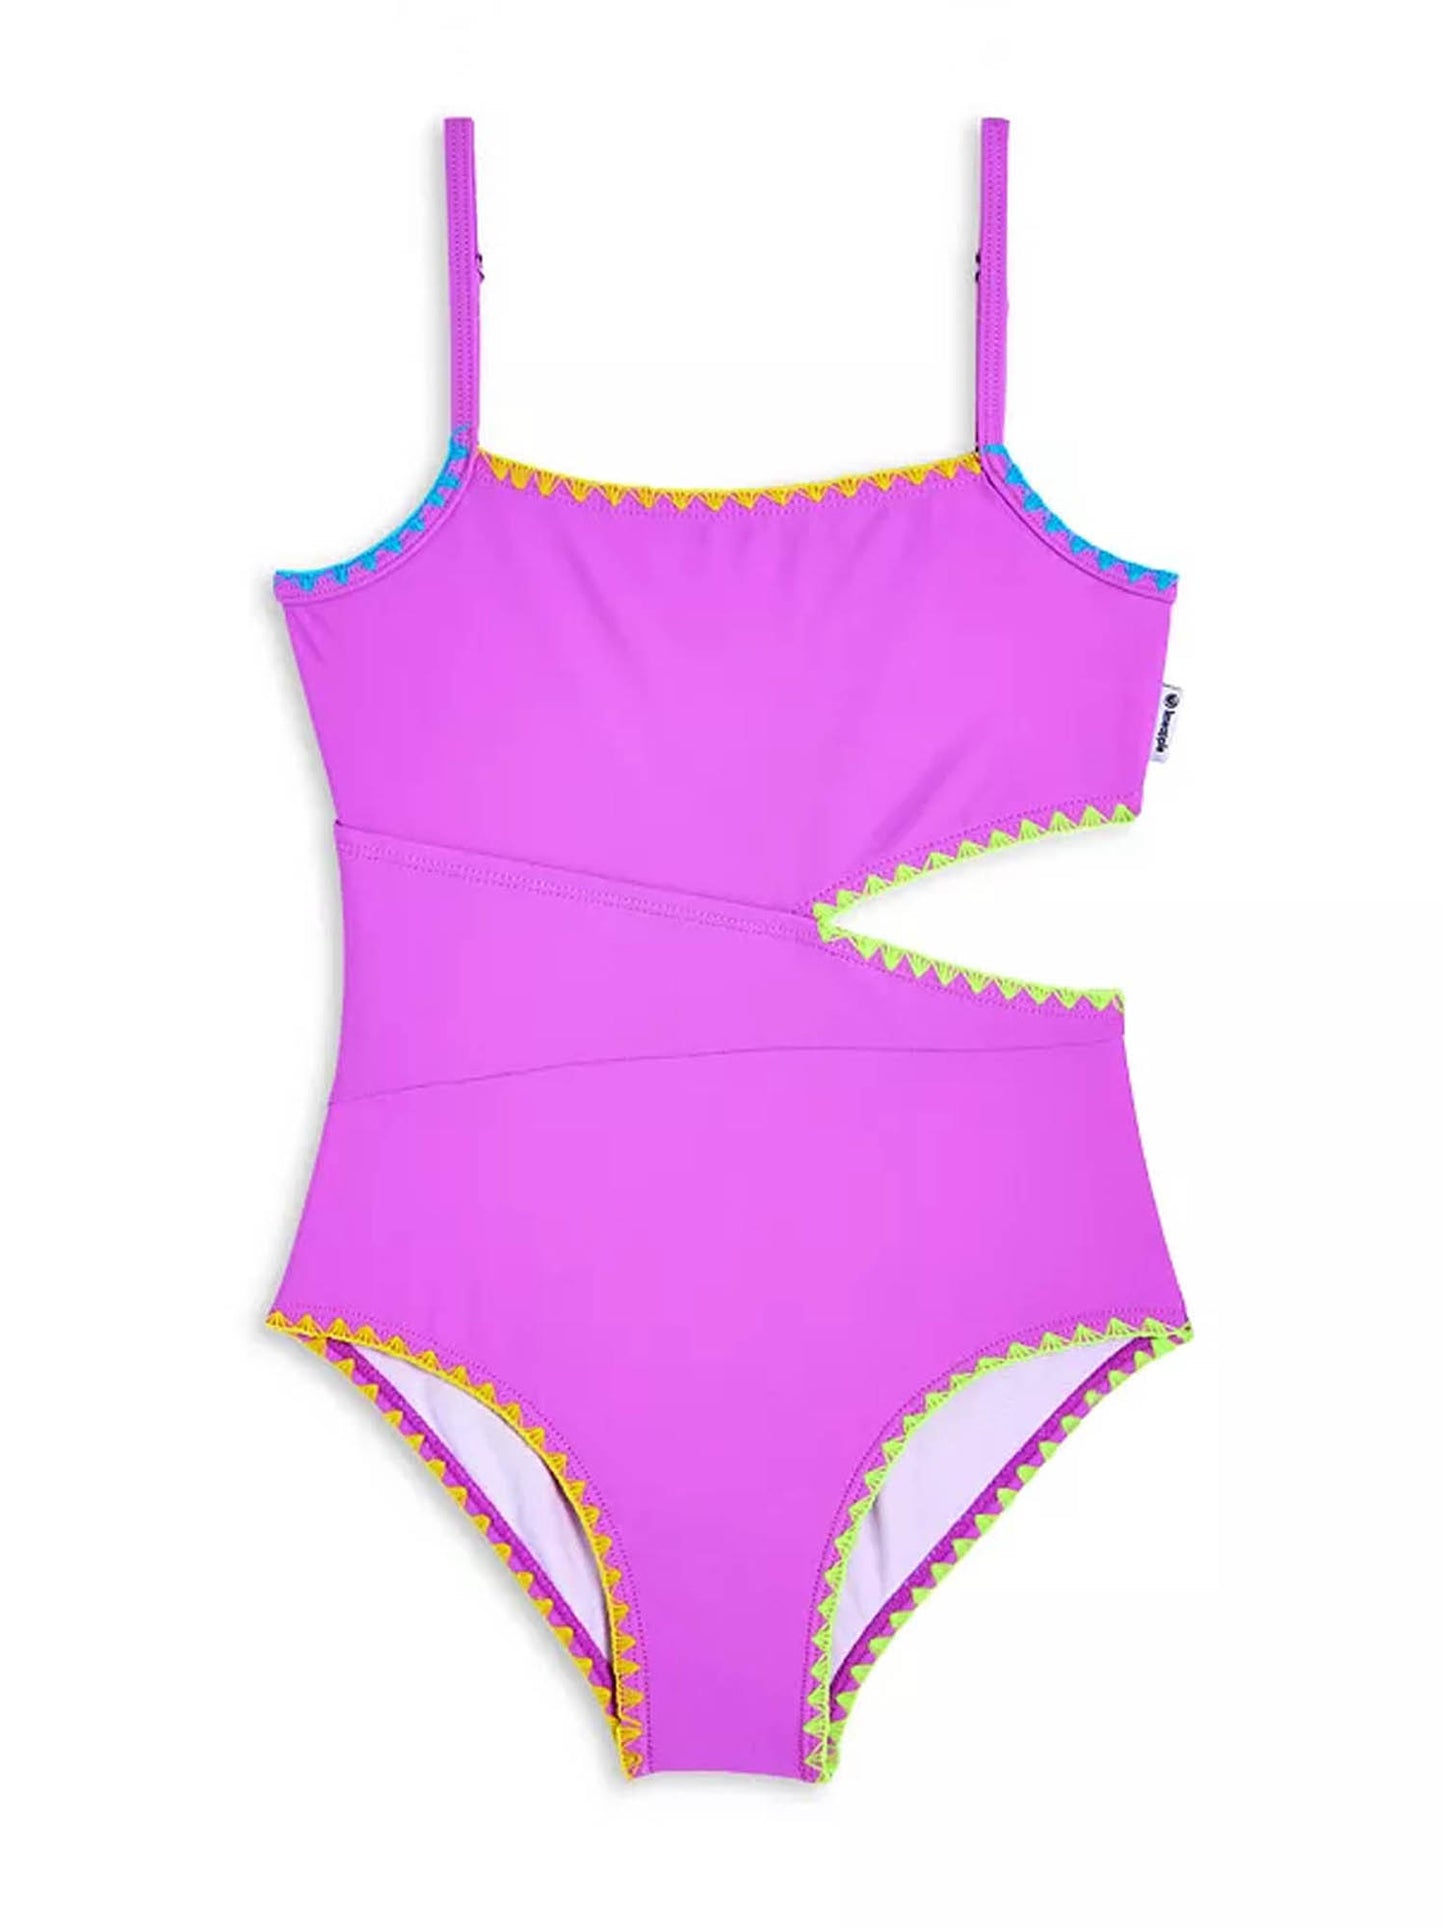 SISA-One piece,  one side cut out on waist, w/embroidery details swimsuit